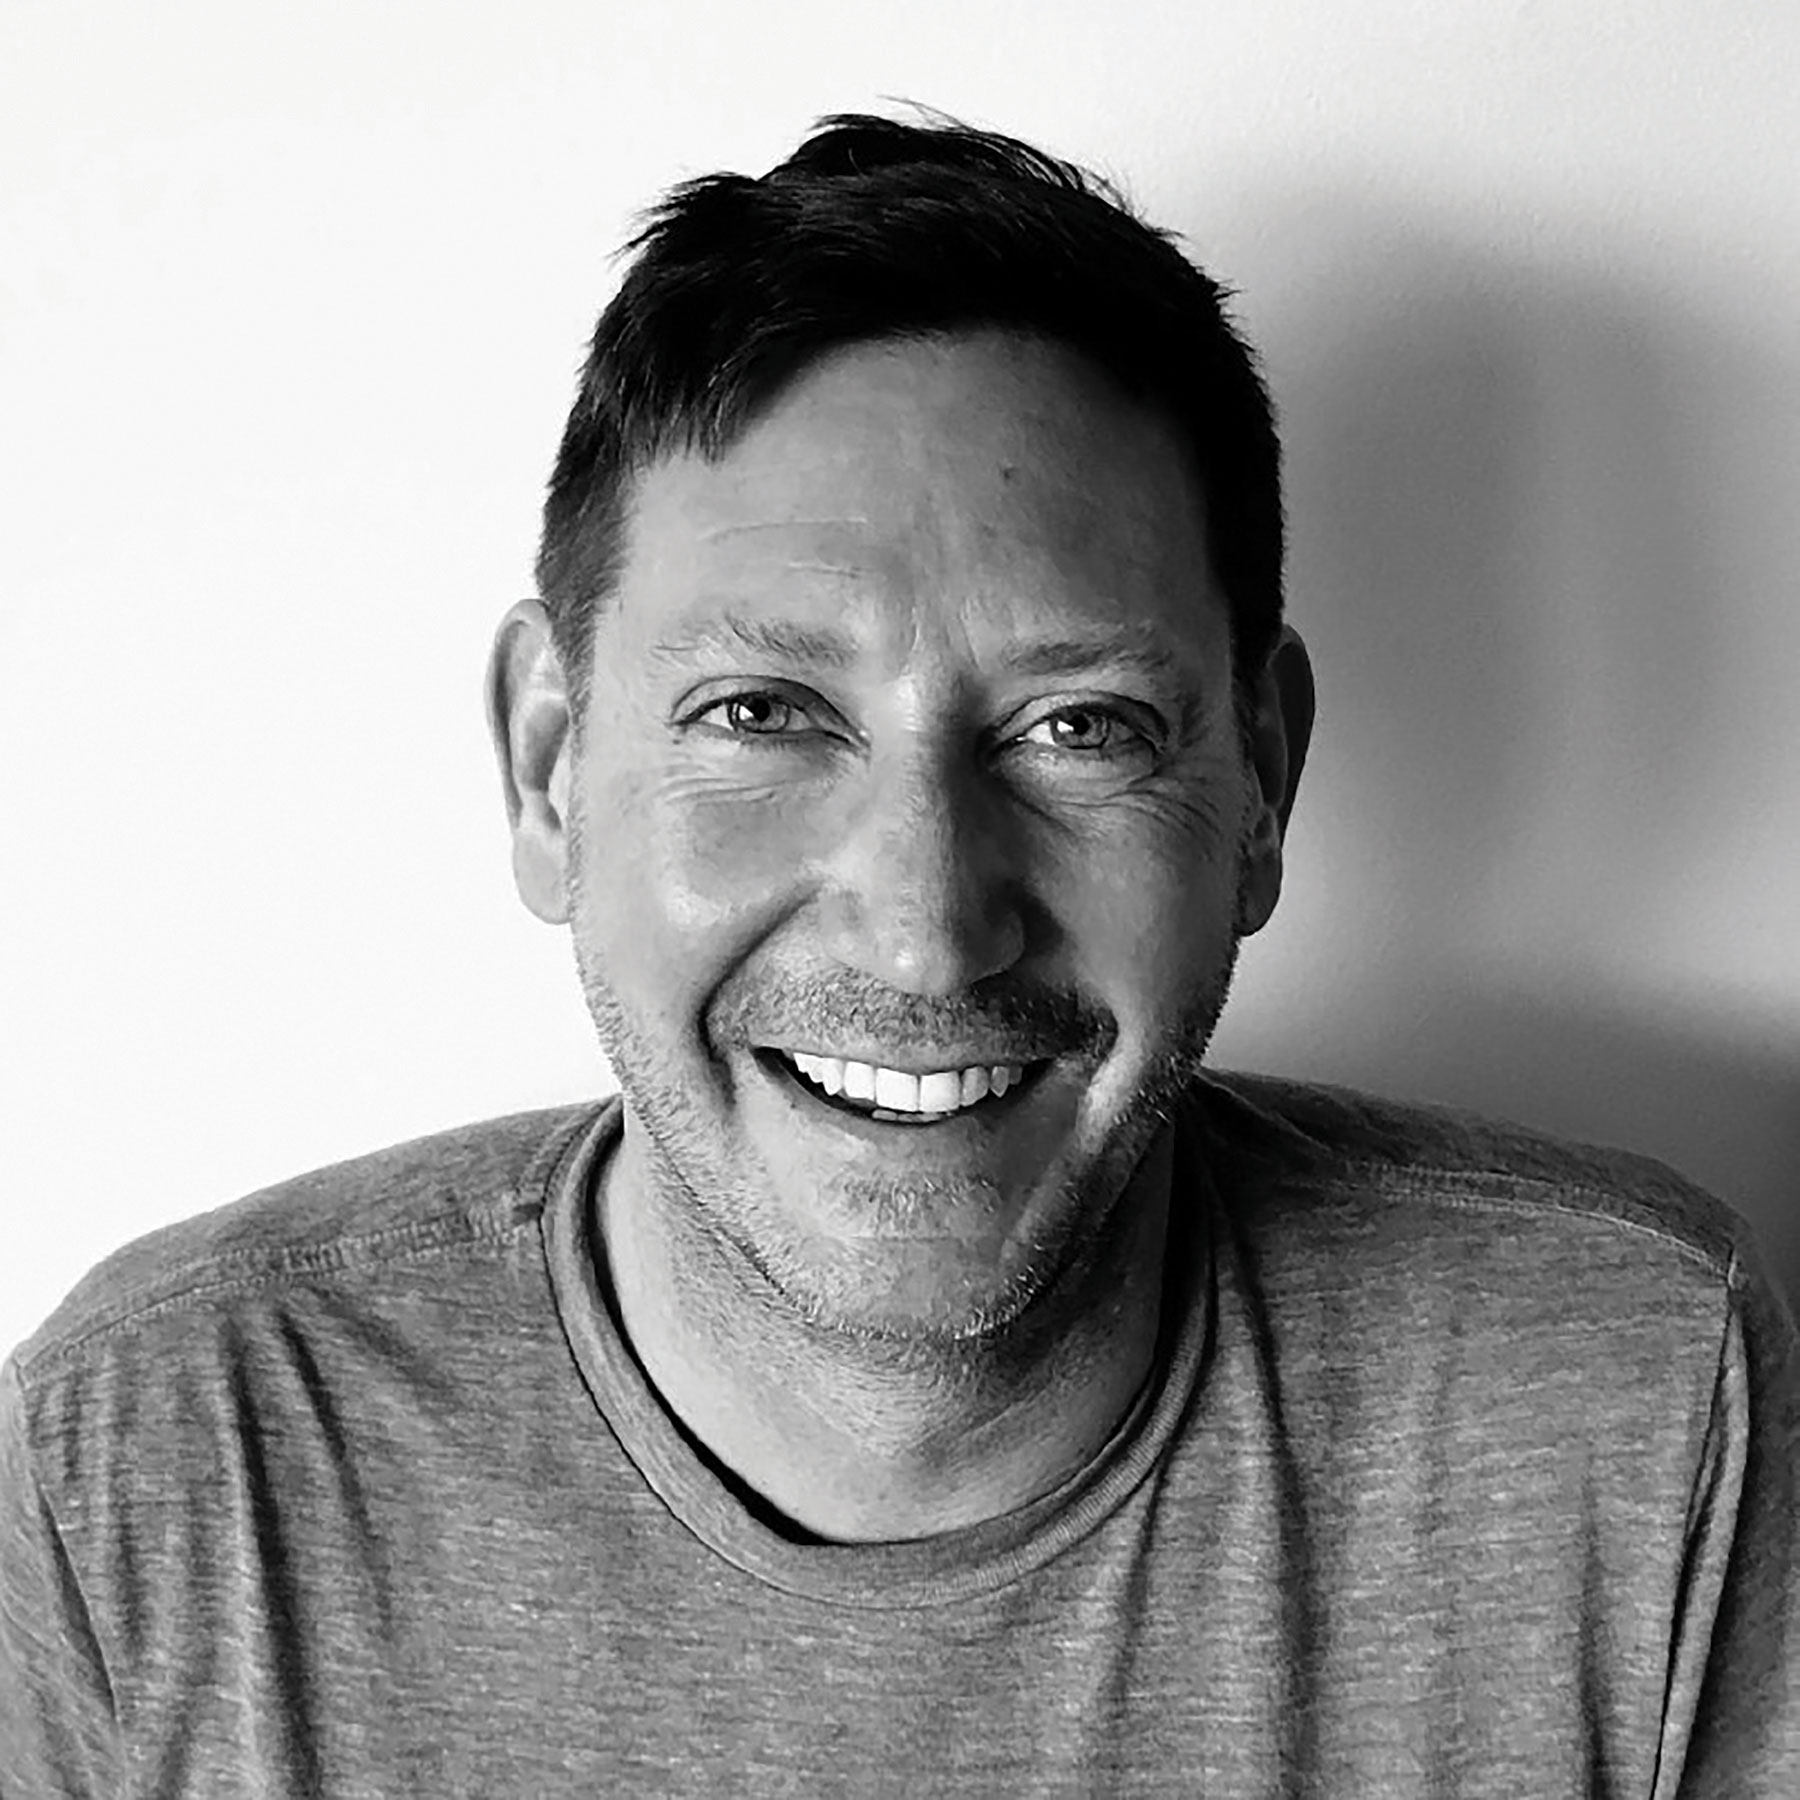 Grayscale photo of a man, Will Benentt, smiling. Image by Will Bennett.